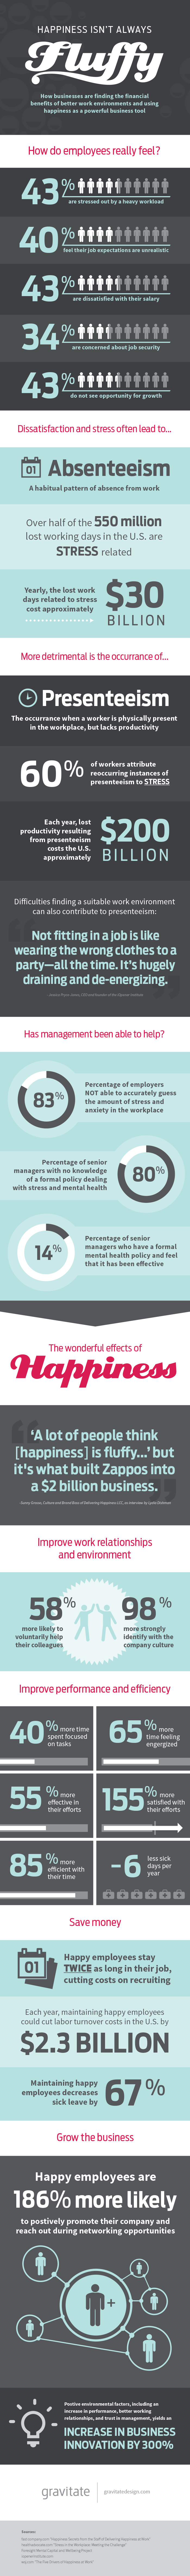 Employee Happiness as a Business Tool Infographic